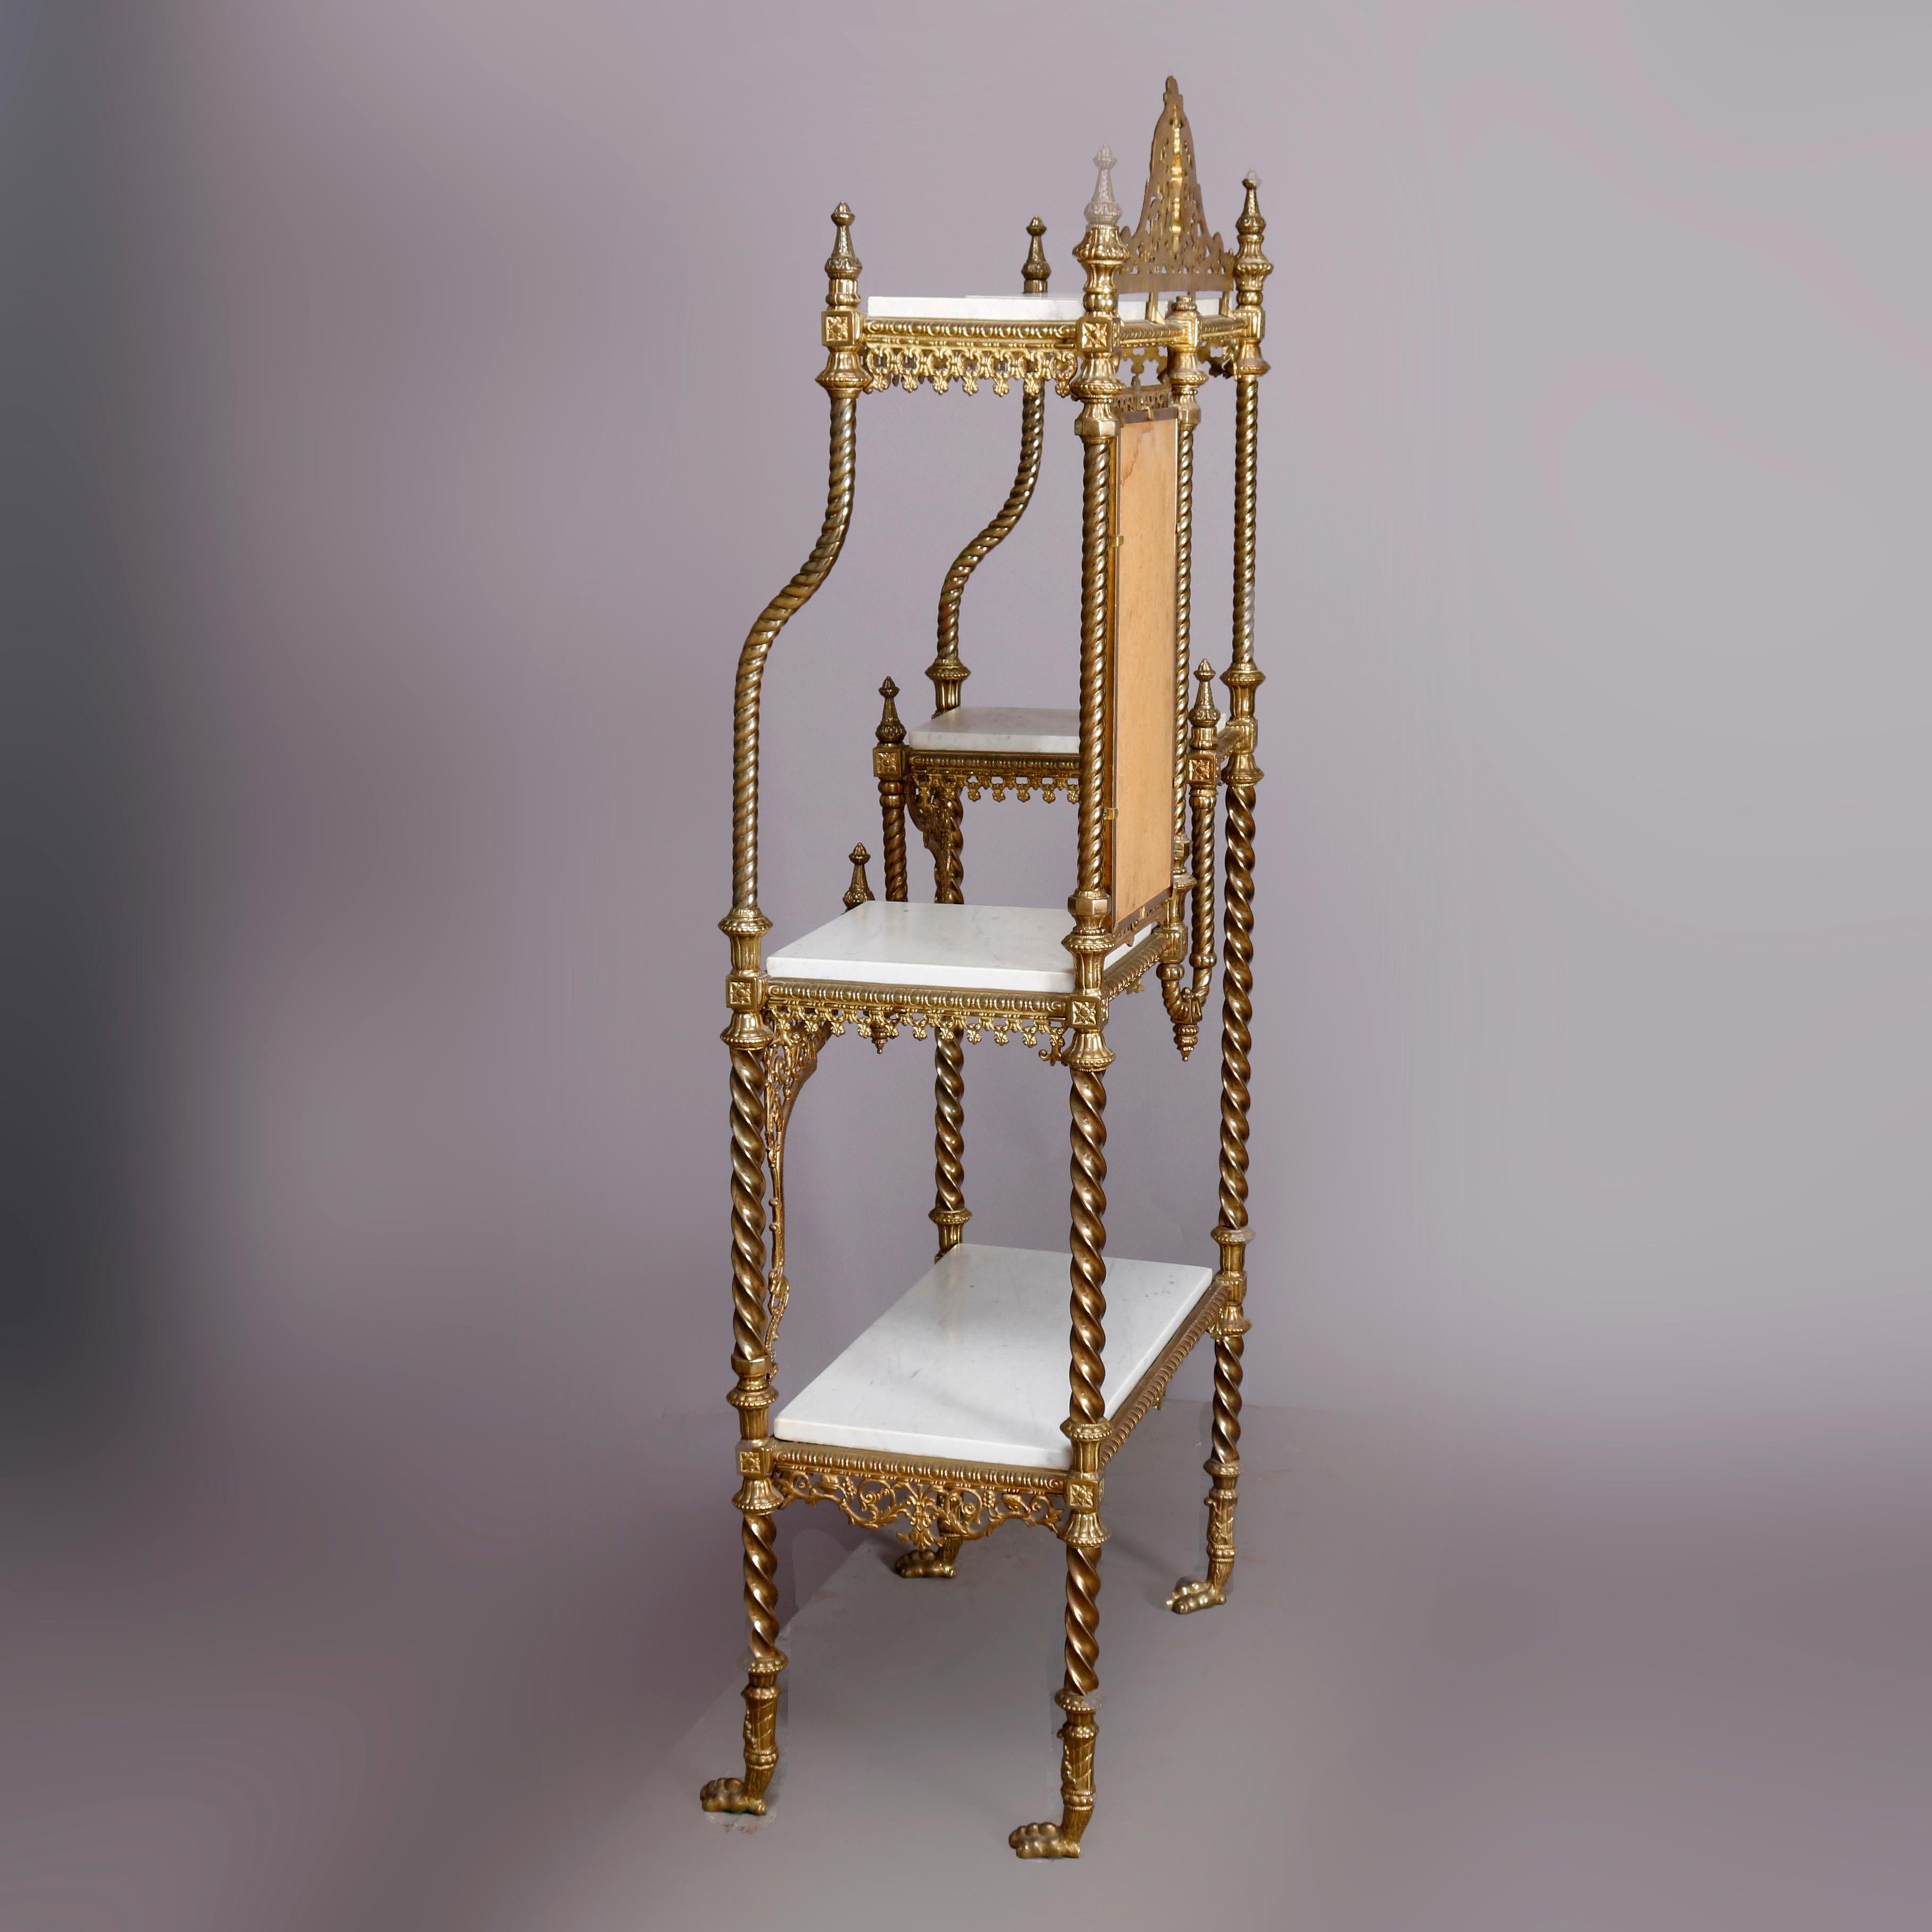 Cast Antique French Louis XVI Style Gilt Bronze and Marble Mirrored Étagère